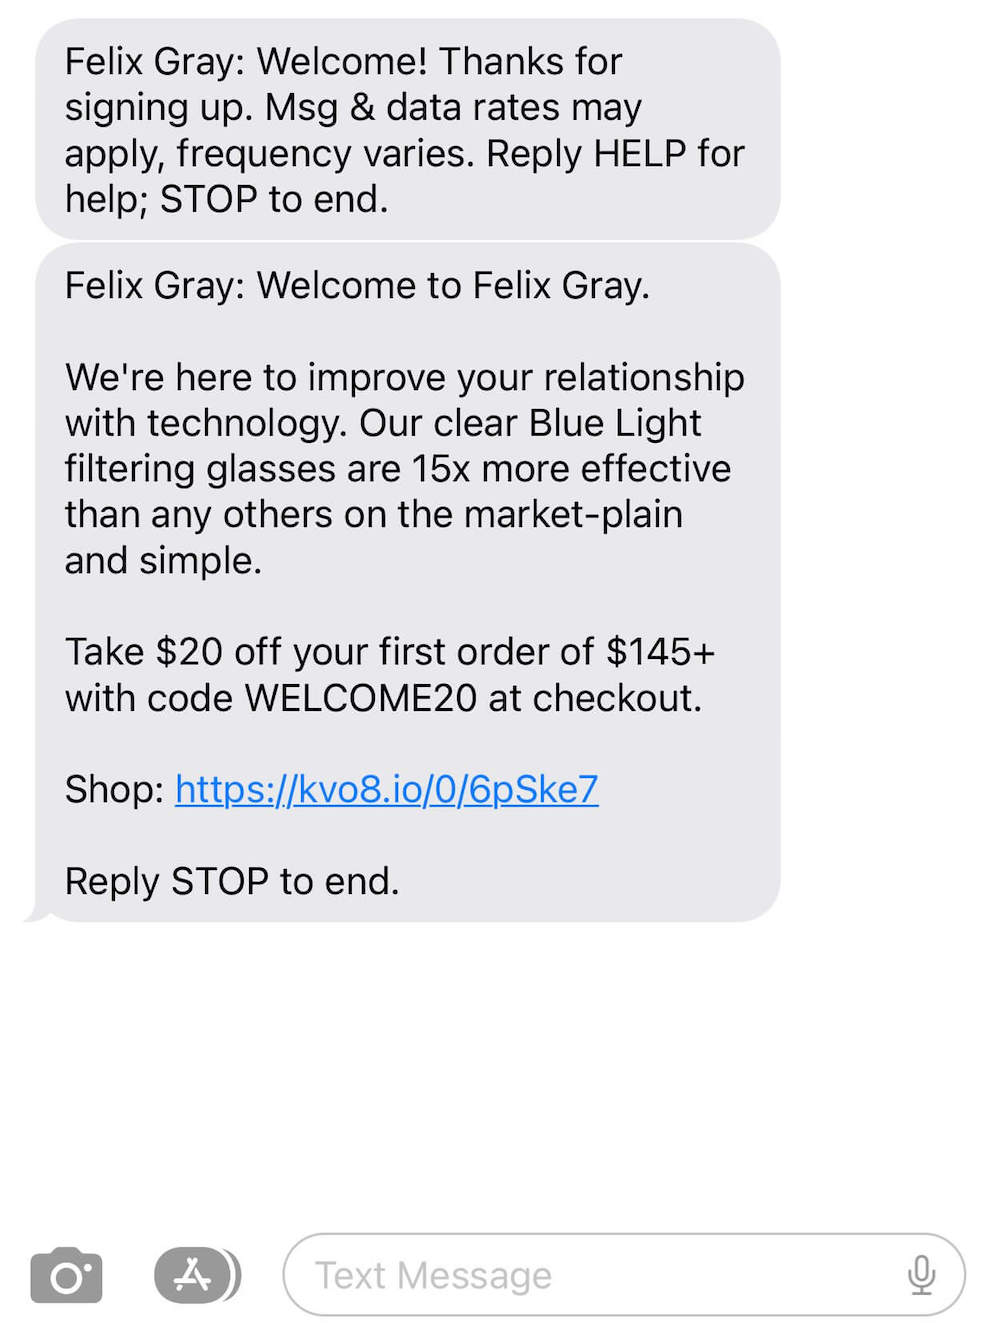 Image shows a text offering subscribers $20 off their first Felix Gray order.